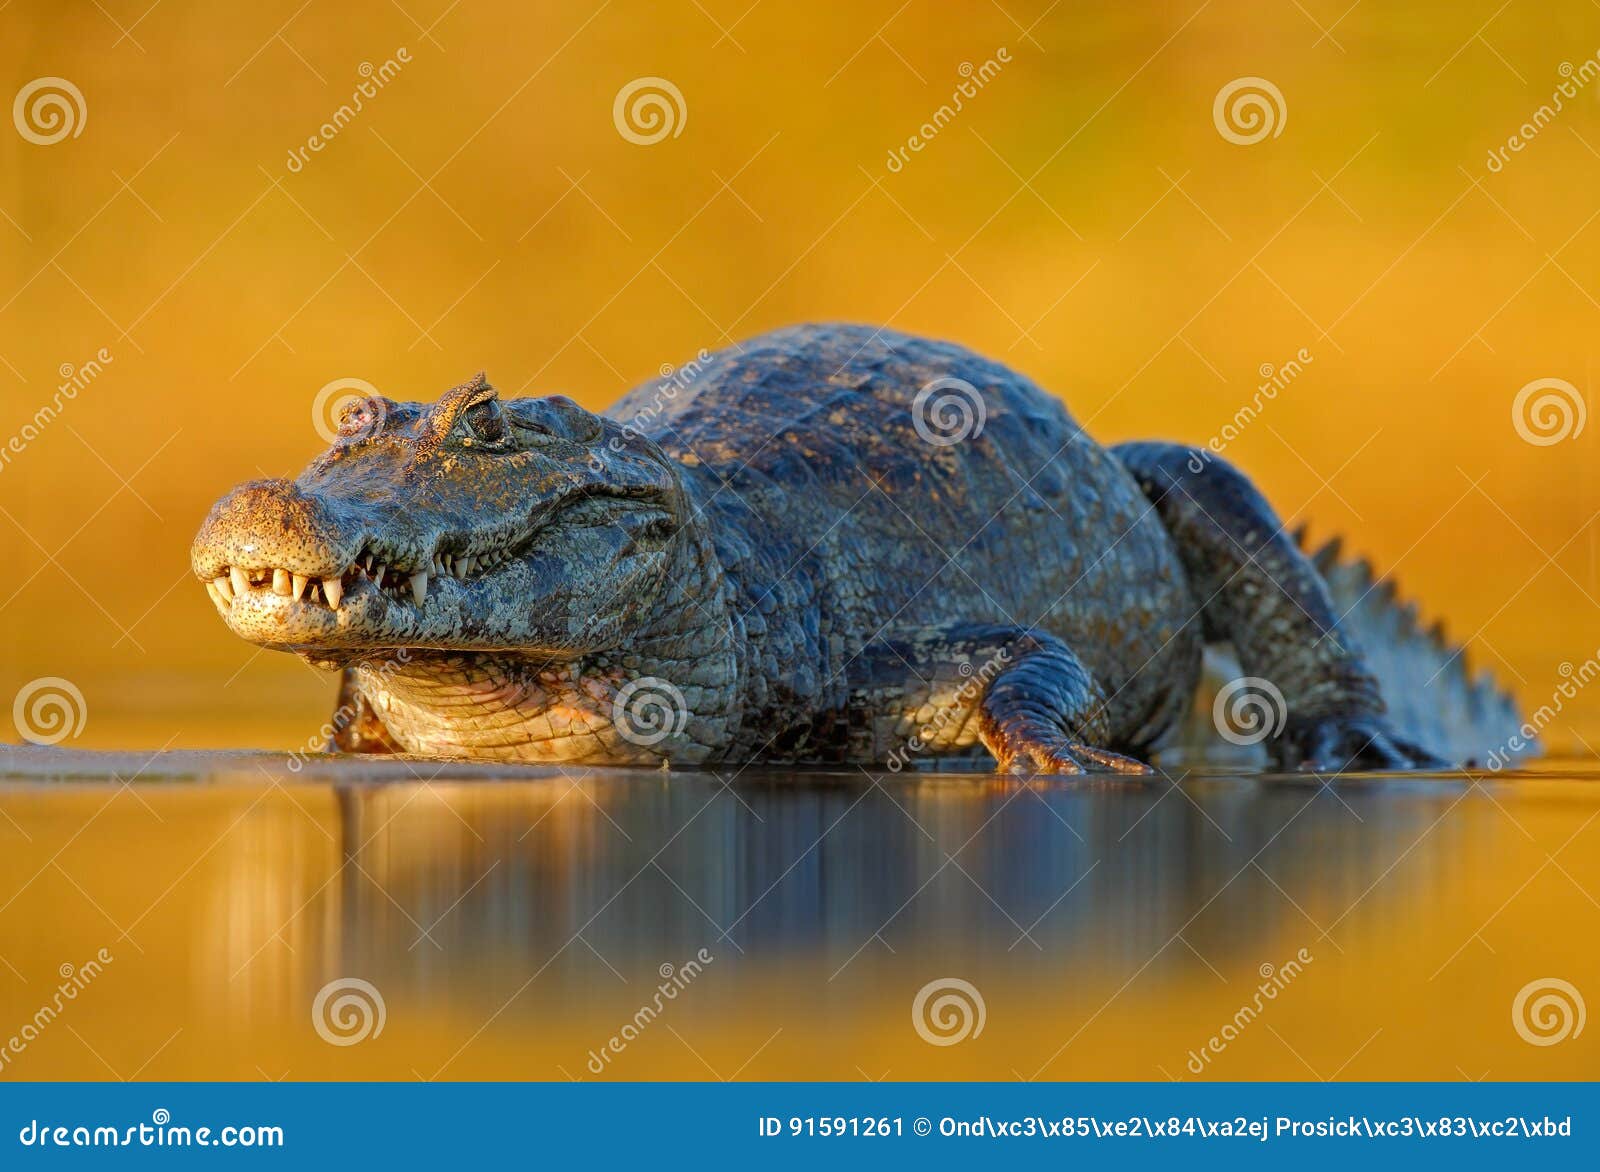 Caiman, Yacare Caiman, Crocodile in the River Surface, Evening Yellow Sun,  Pantanal, Brazil. Wildlife Scene with Crocodile in Sout Stock Image - Image  of action, nature: 91591261